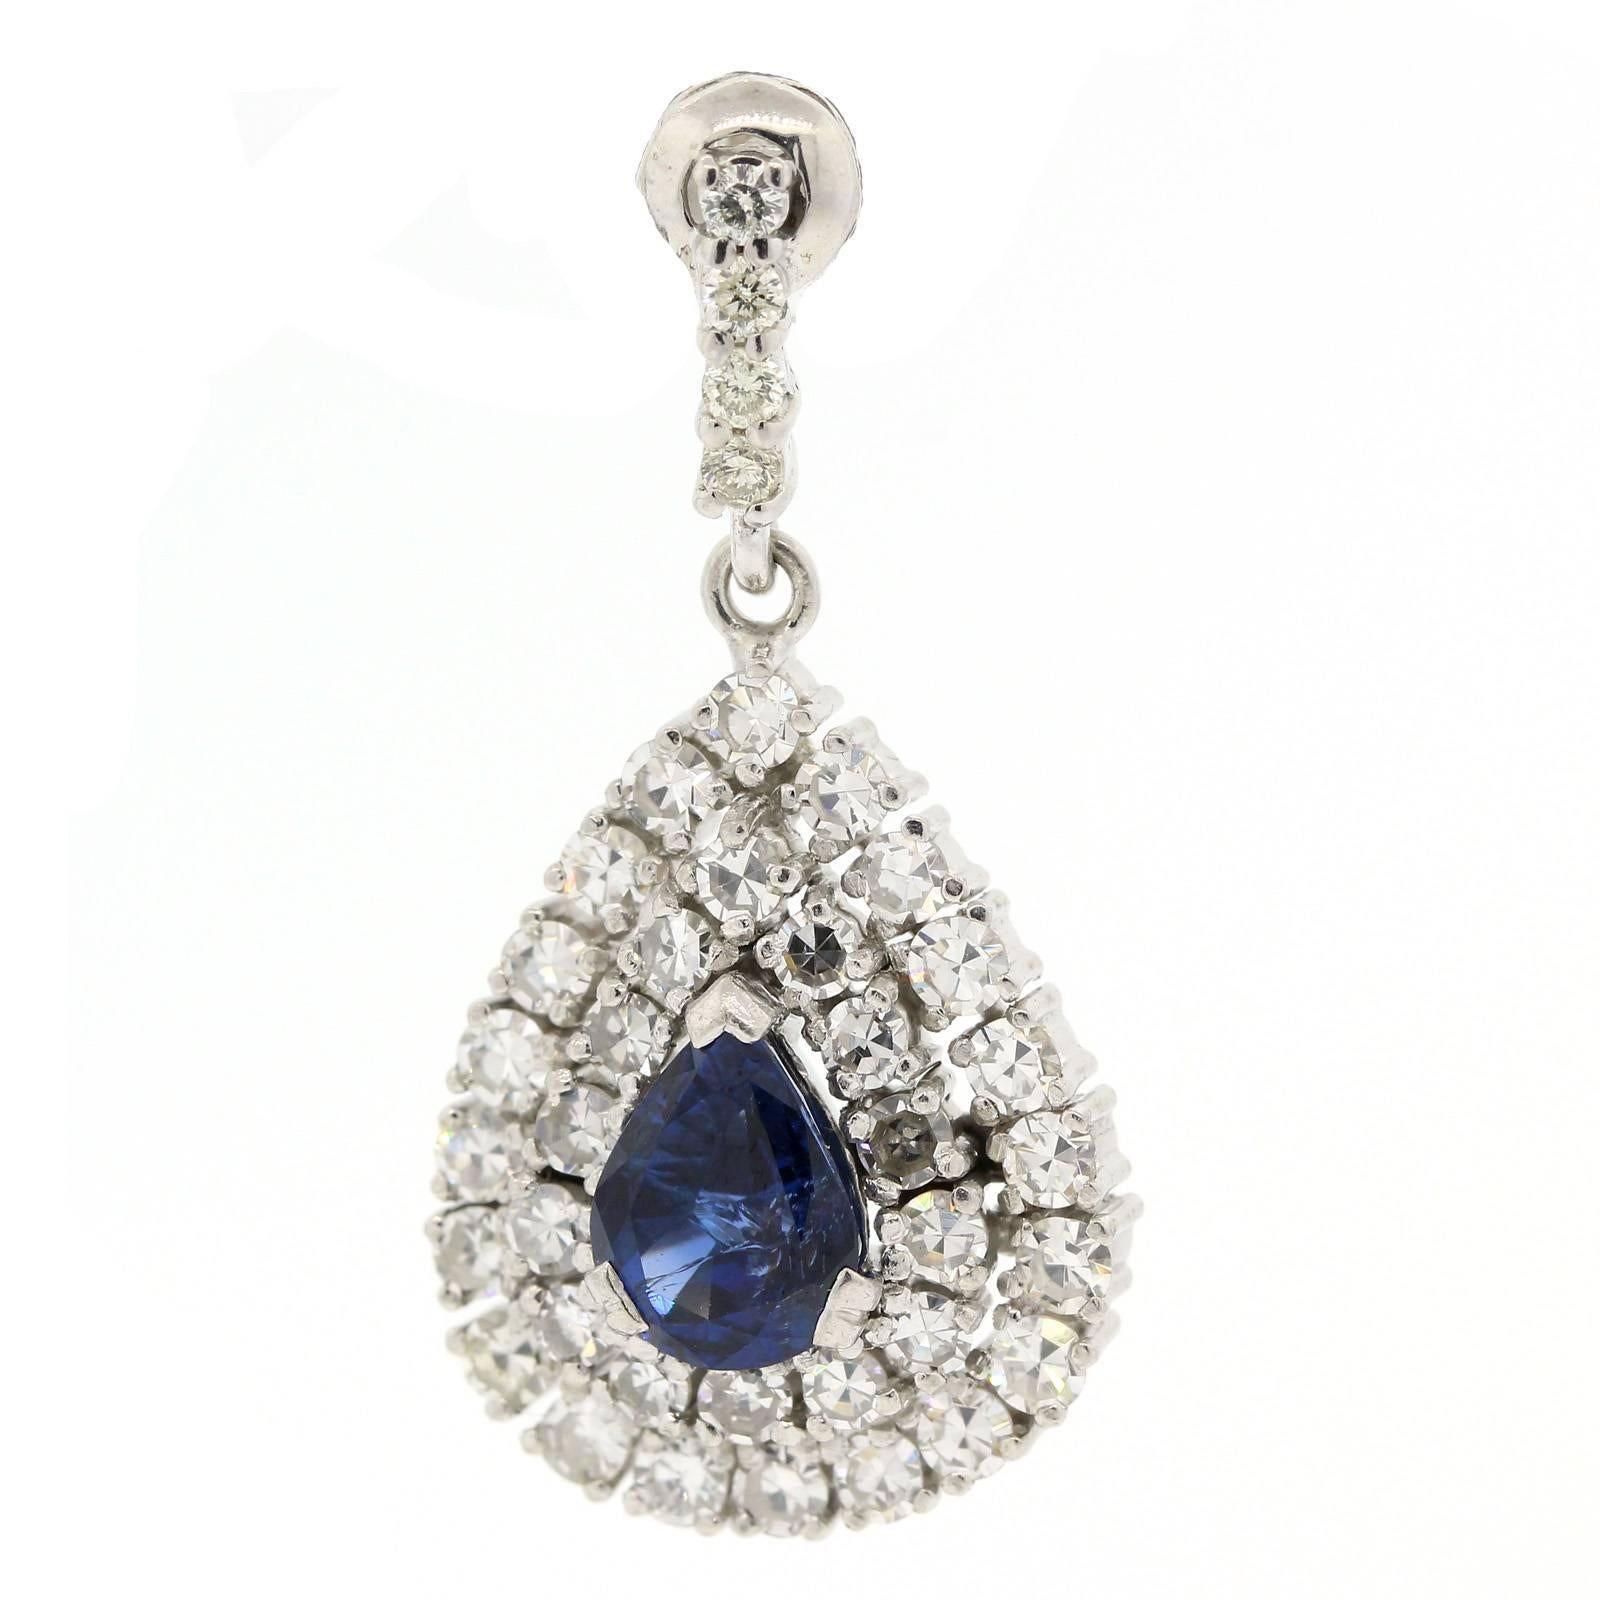 Brilliant contemporary Sapphire and diamond drop earrings,  The 18KT white gold earrings each feature a 1.33 carat Pear Shape blue Sapphire surrounded by two rows of diamonds and dangling from a diamond bar.  All diamonds total approximately 2.60